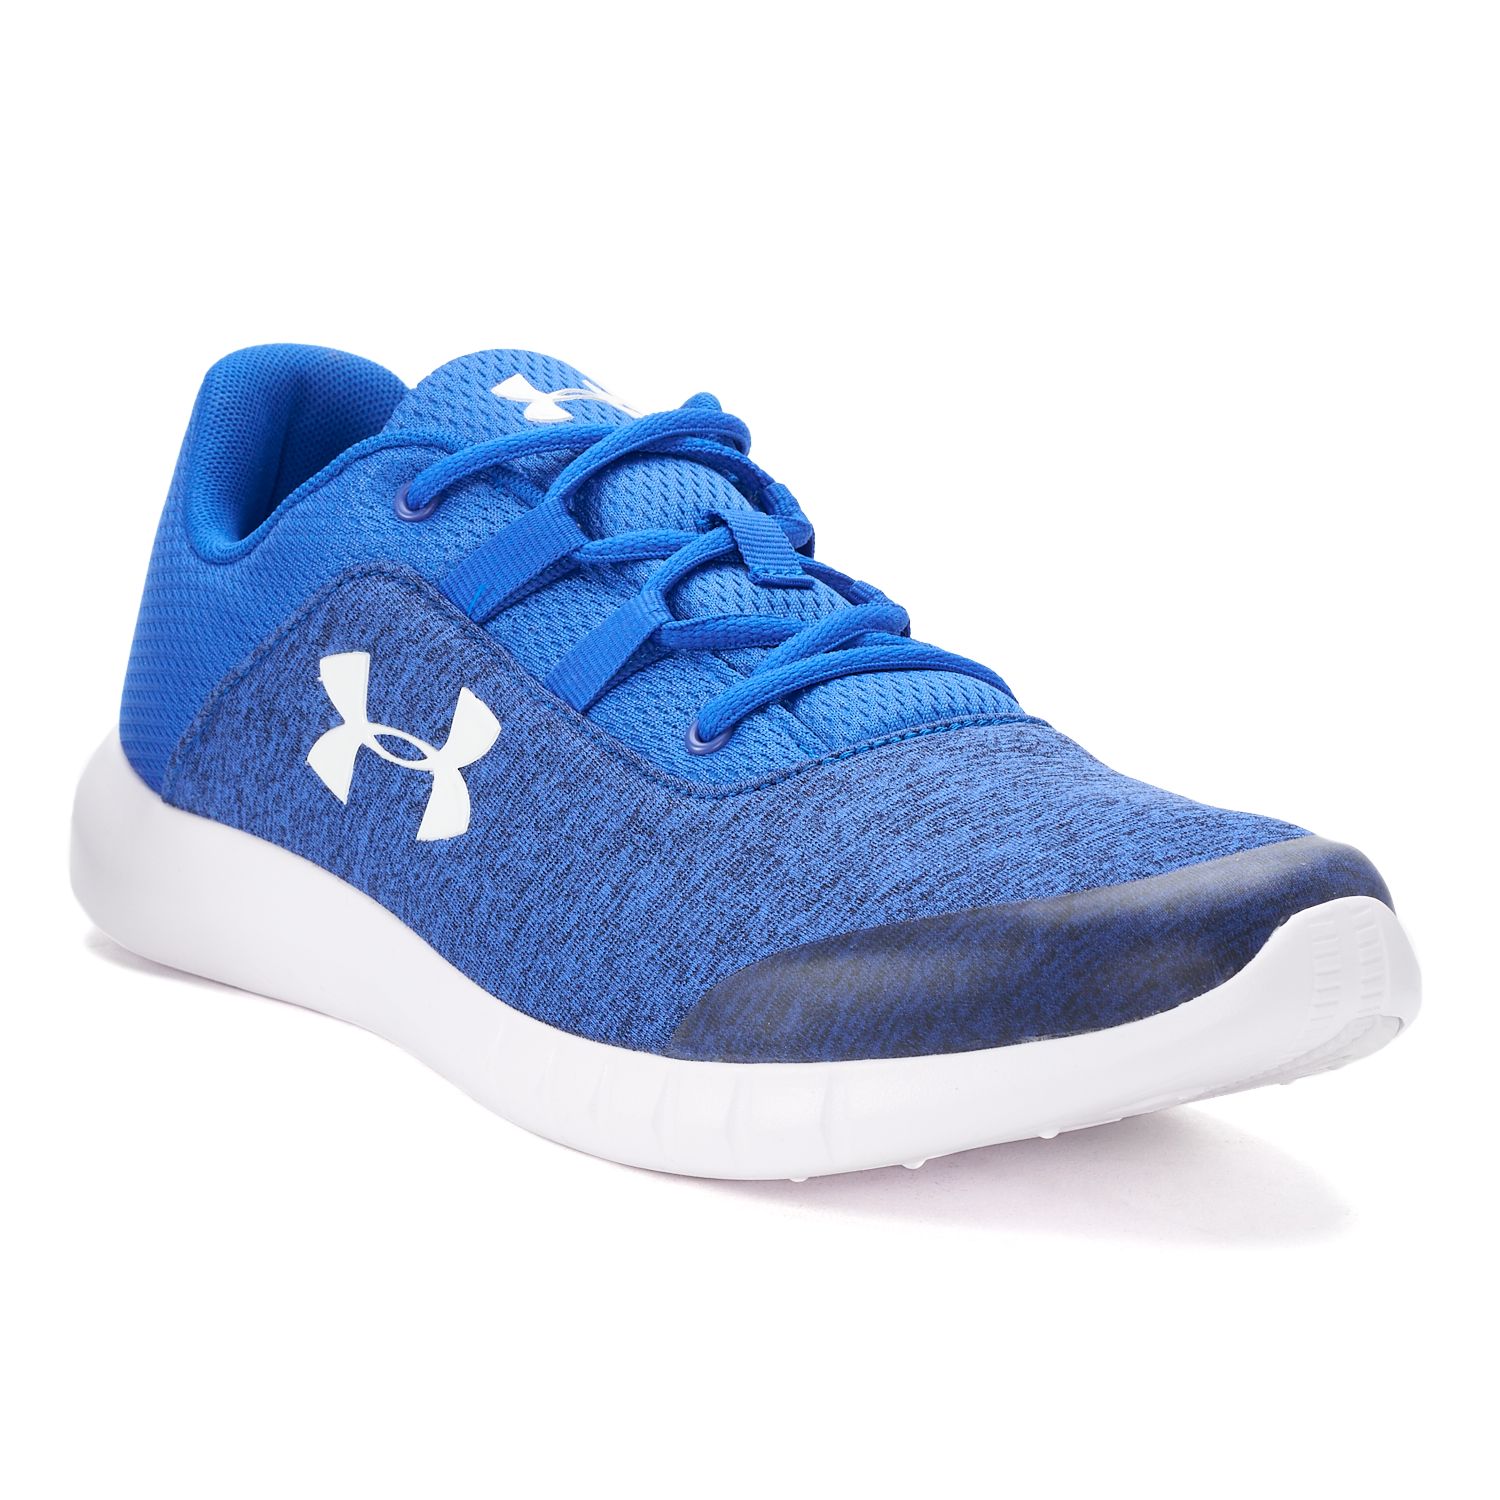 under armor mojo shoes